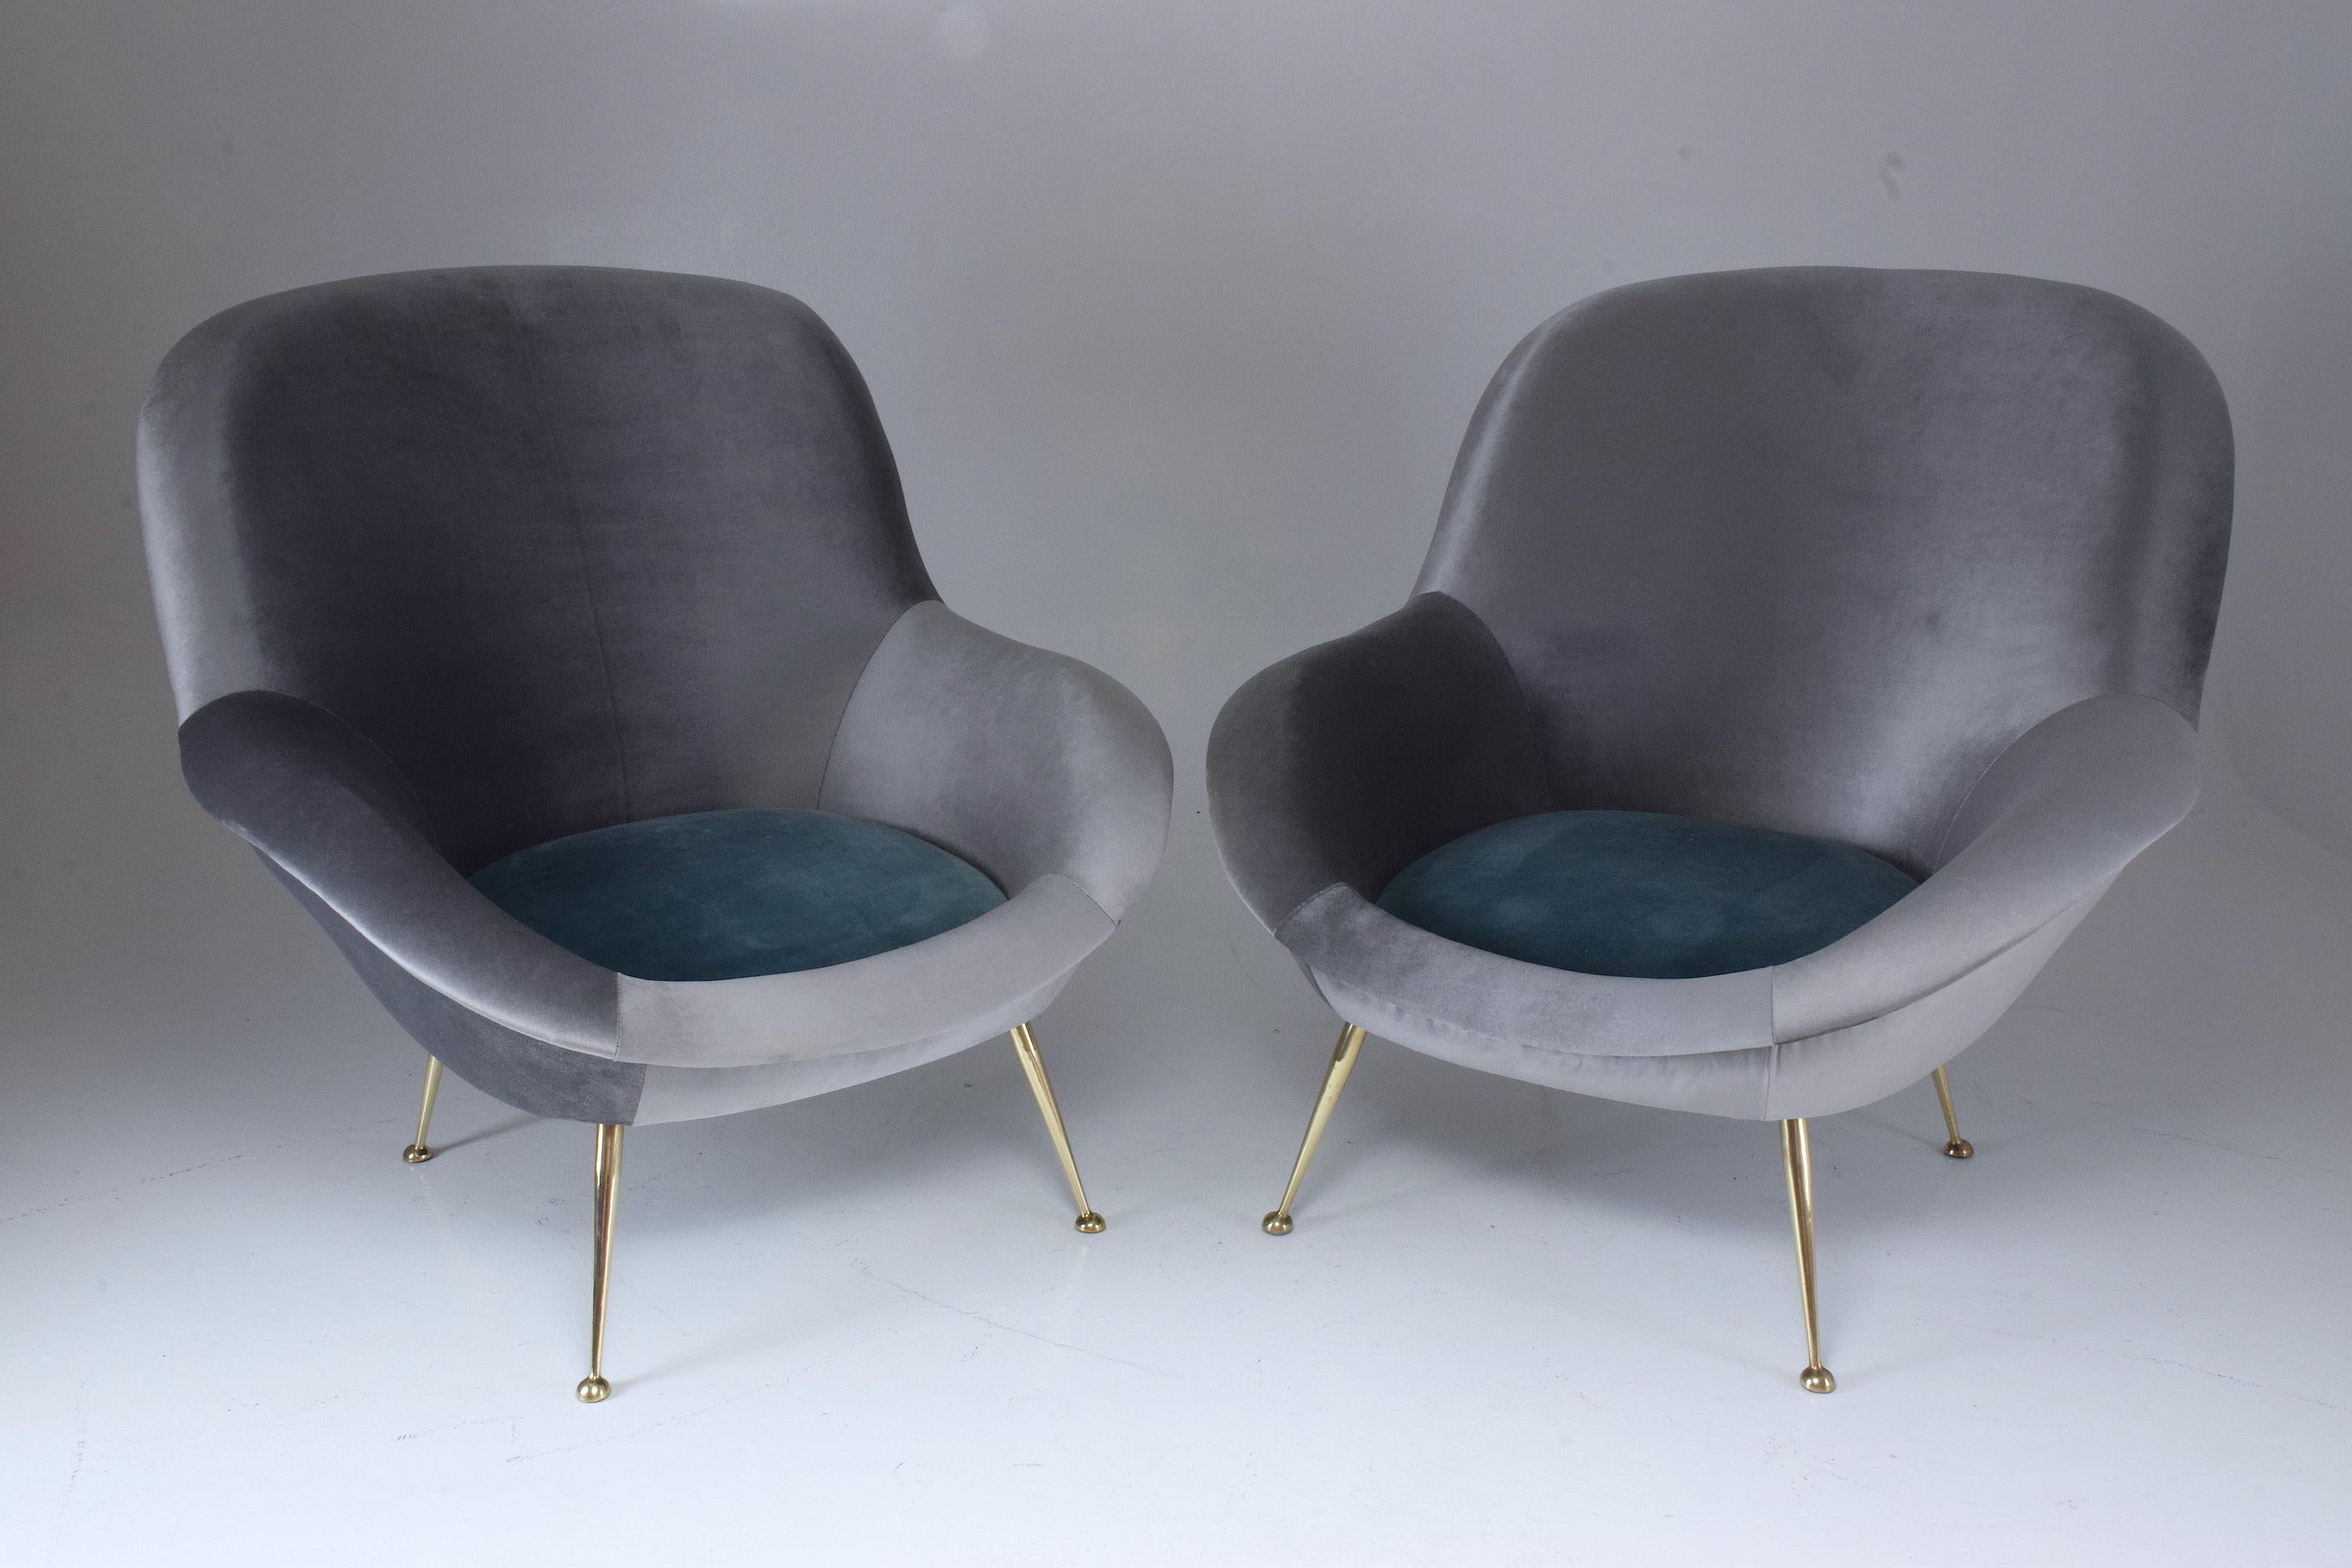 A rare pair of 20th-century Italian armchairs manufactured by ISA Bergamo and designed in an organic curved shape with a cushioned outer ring and comfortable depth which sit on splayed polished brass legs.
In fully restored condition and